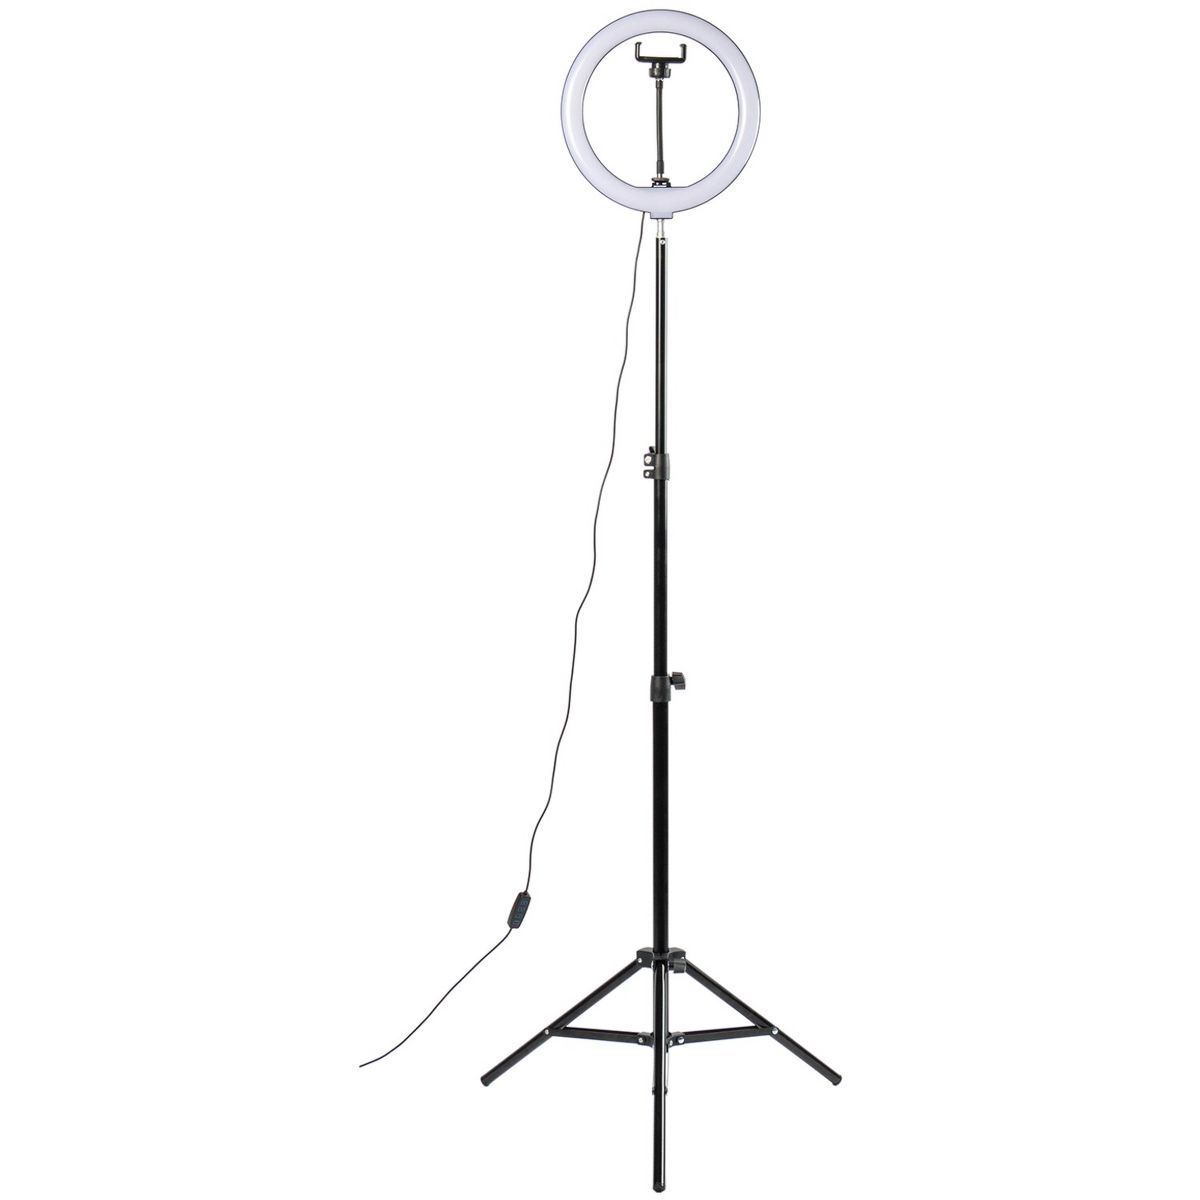 Blackmore Pro Audio LED Selfie Ring Light with Tripod. | Target